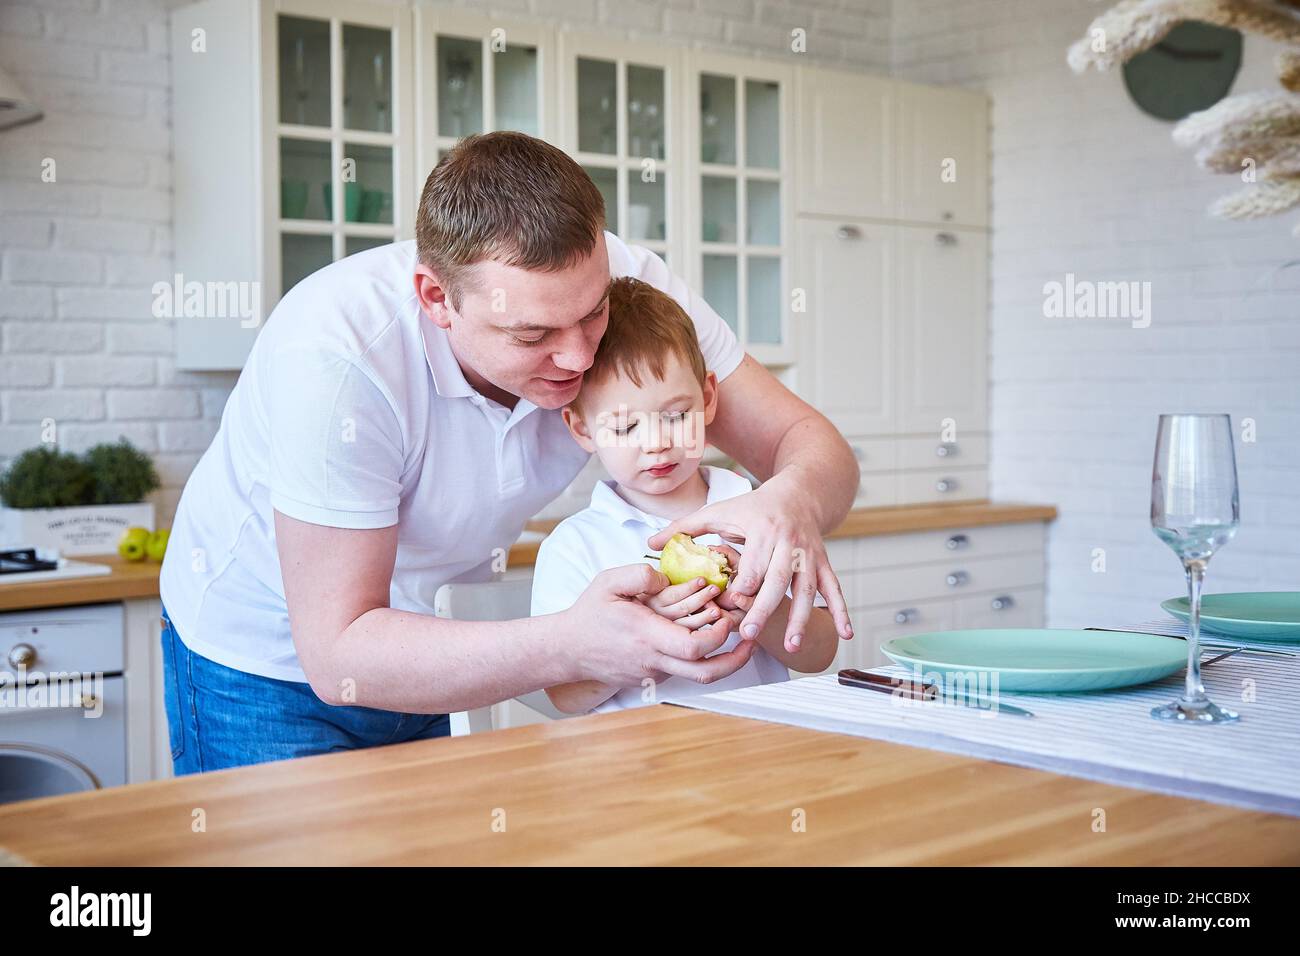 boy with his father in the kitchen. The child eats an apple. The concept of family and fatherhood. Copy space Stock Photo